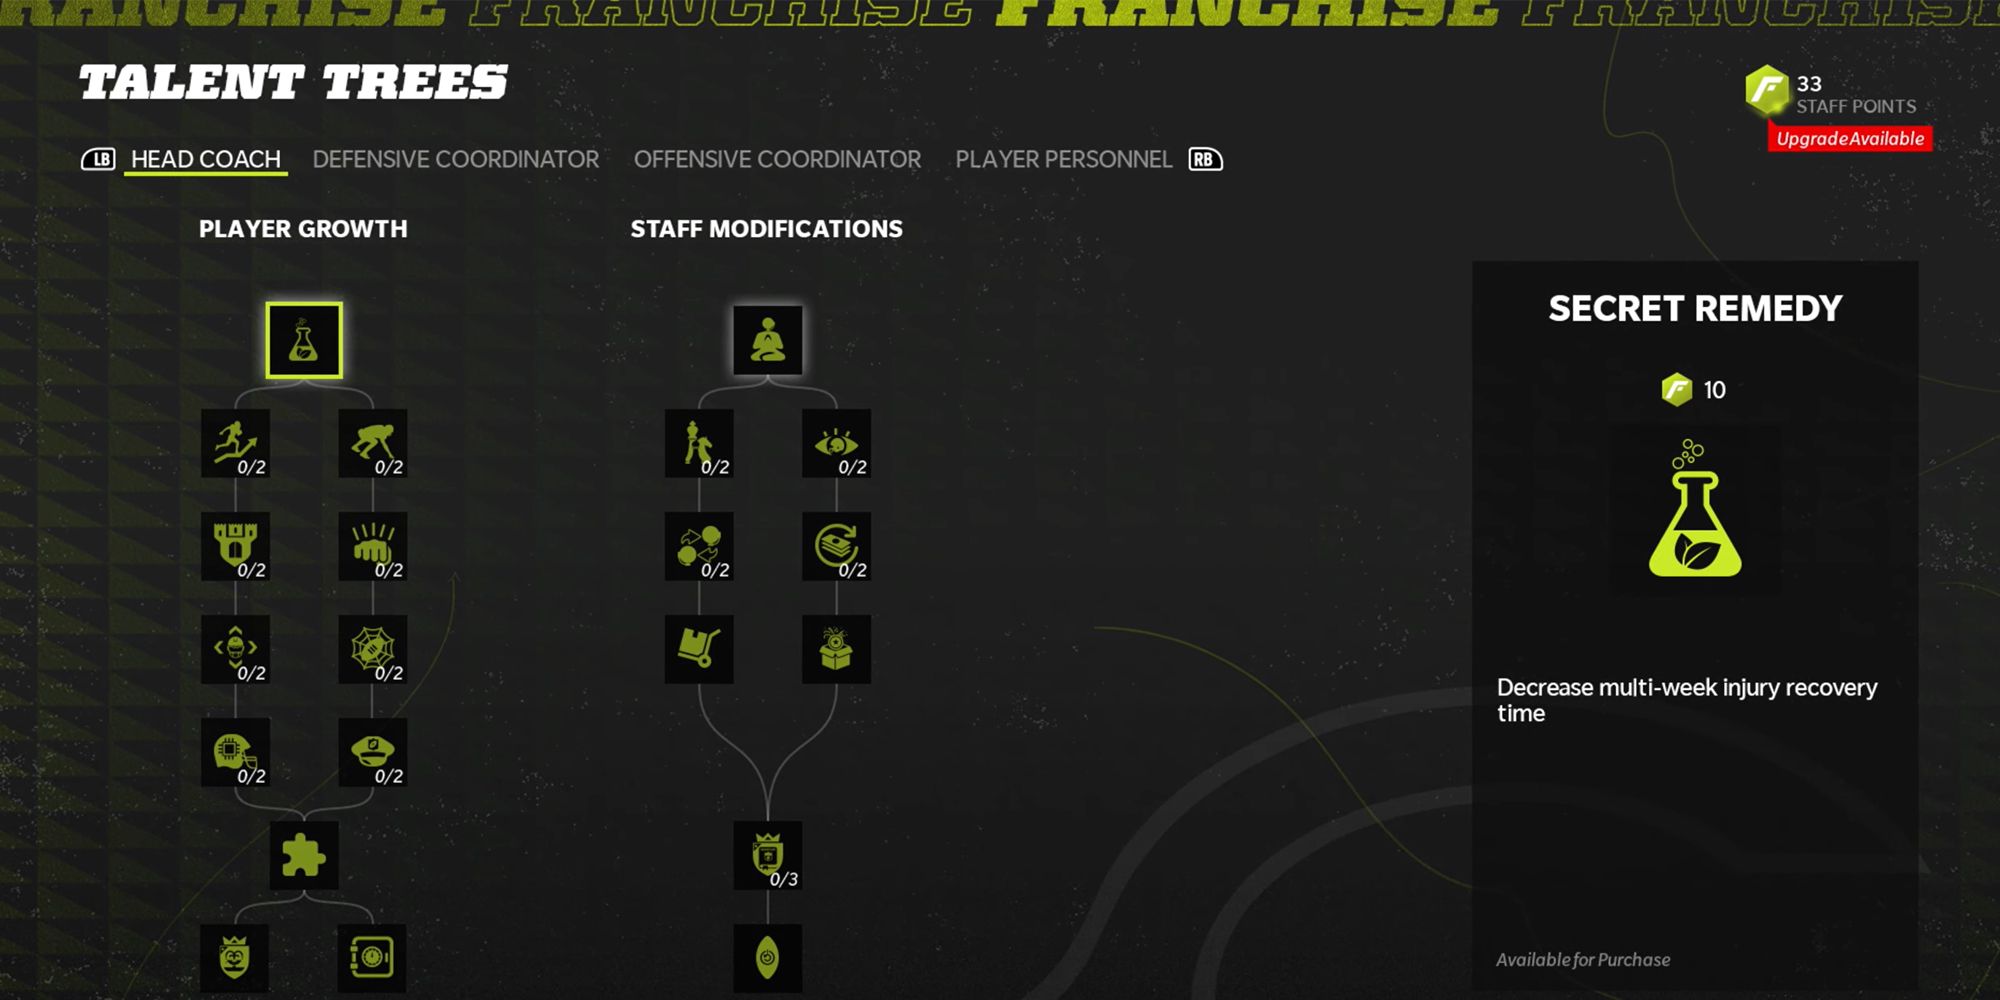 Madden 22 Coaching Skill Tree in Franchise Mode